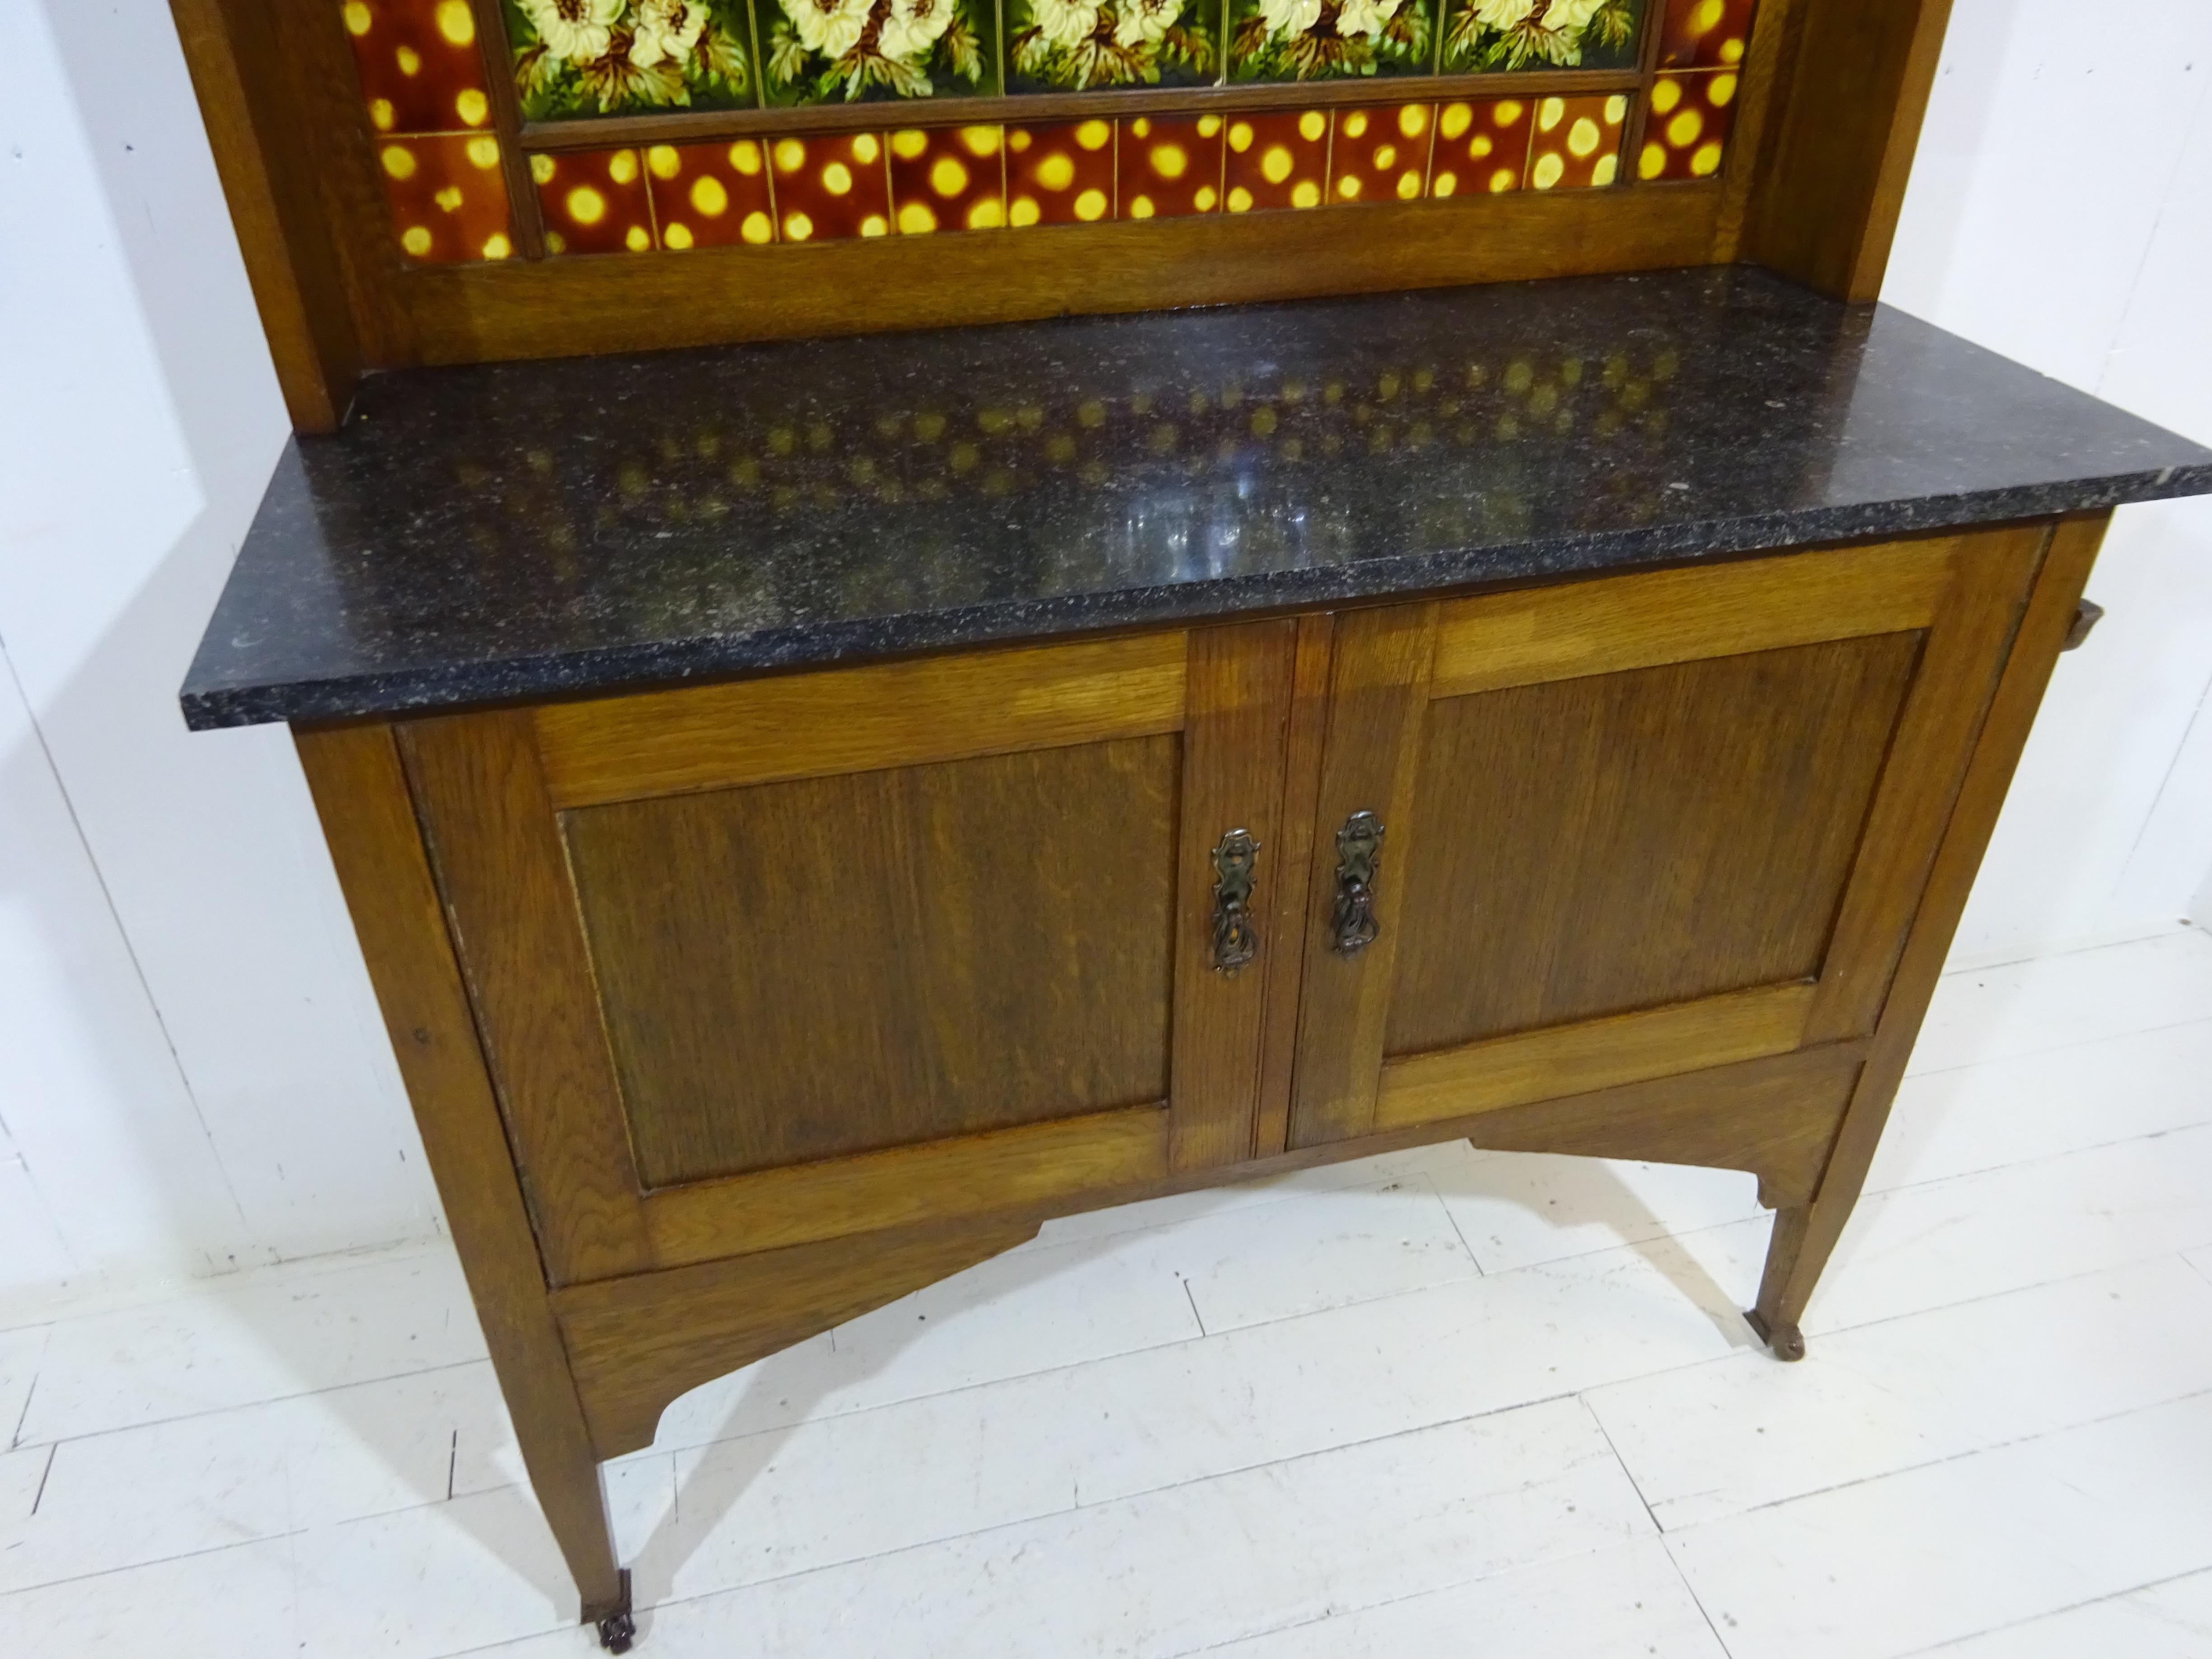 Late 19th Century Victorian Marble Top Wash Stand in Oak with Floral Glazed Tiles